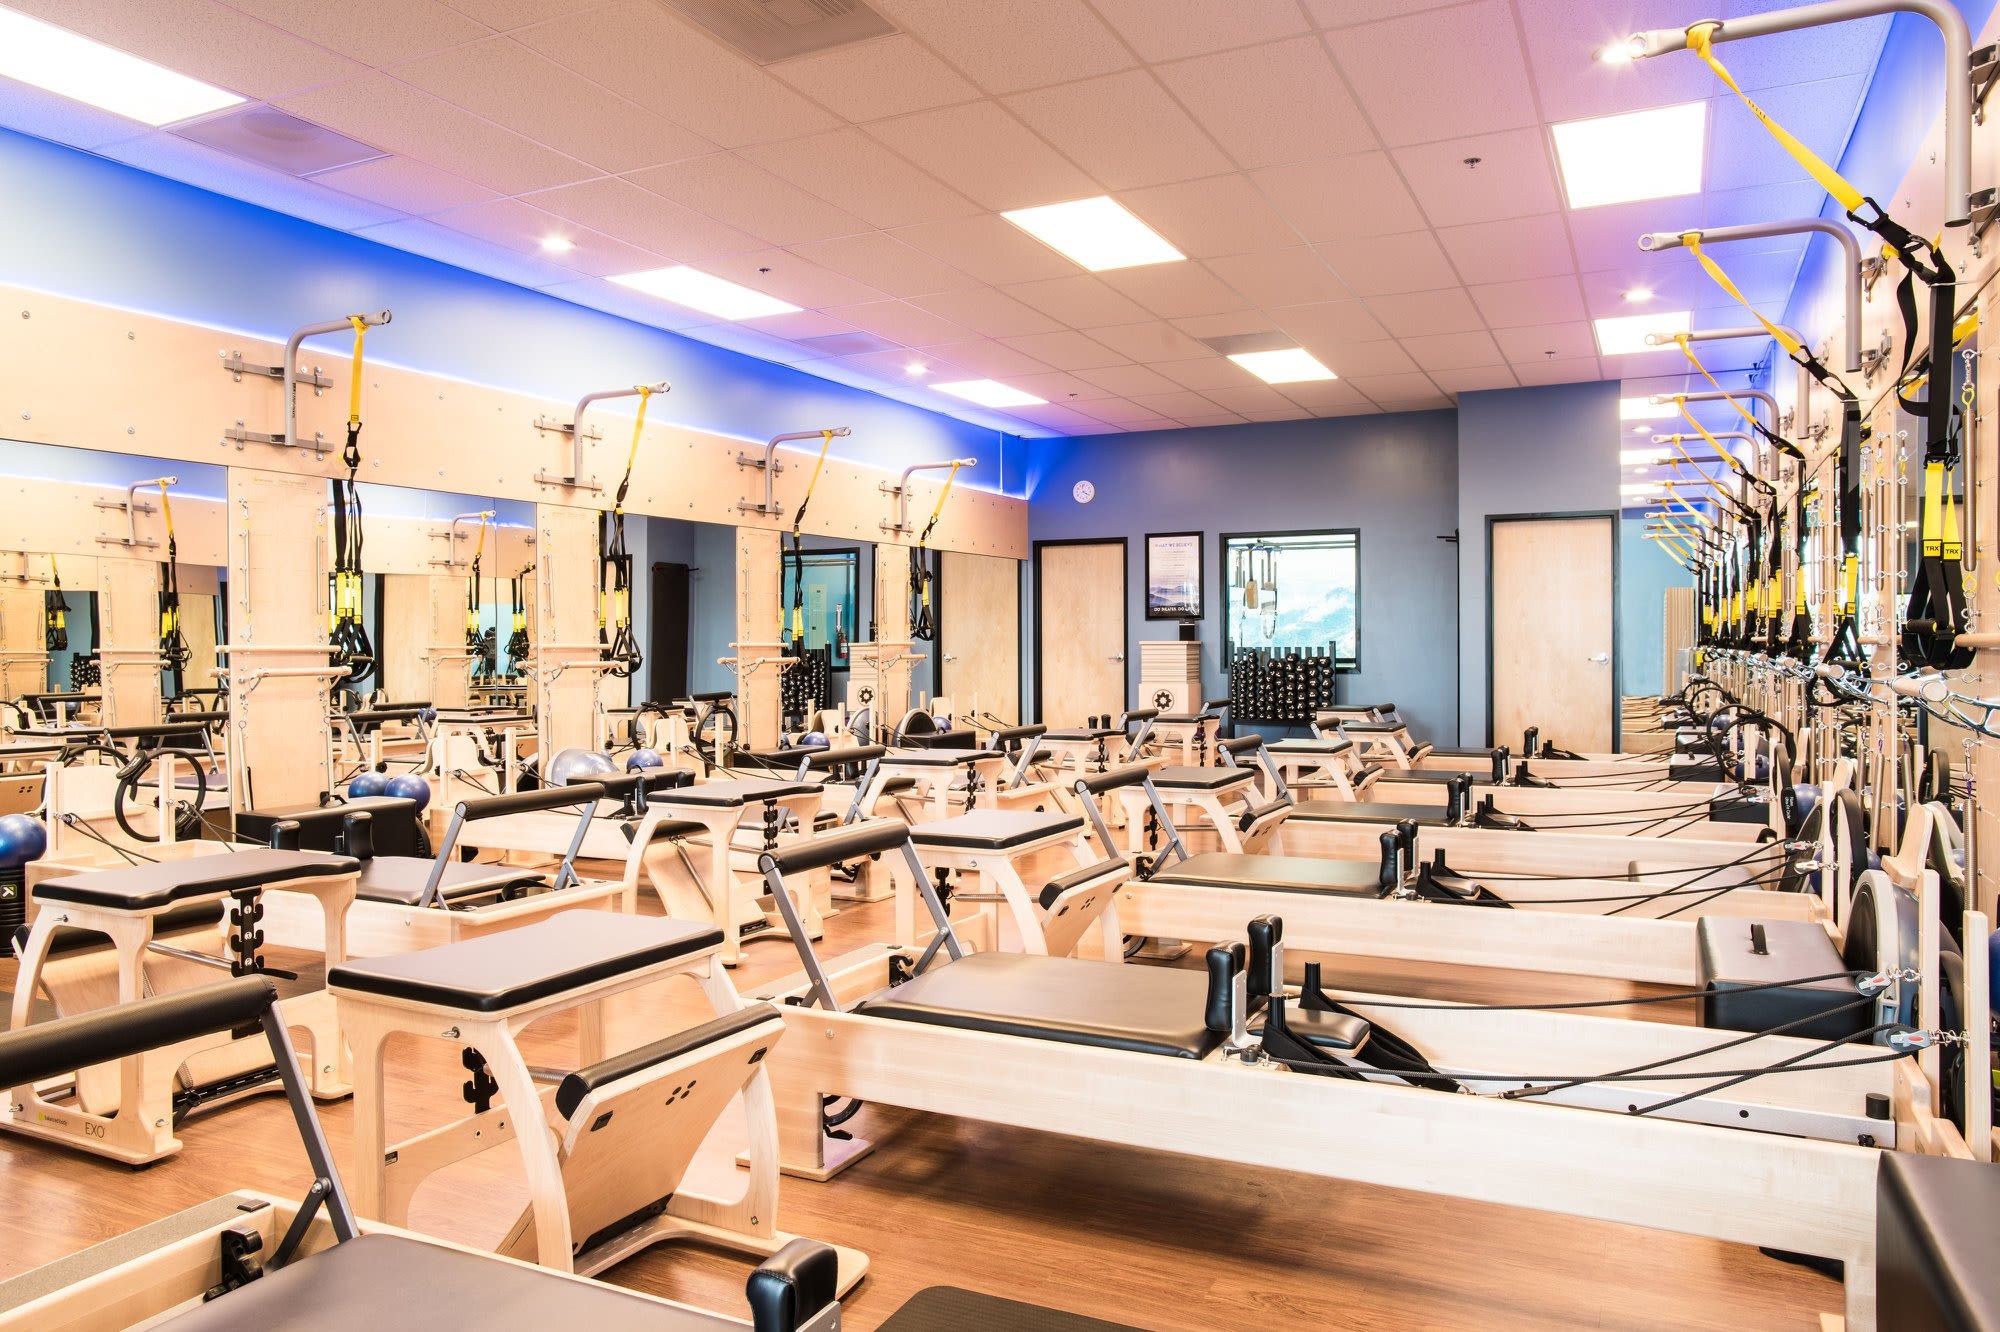 Club Pilates - Hilliard: Read Reviews and Book Classes on ClassPass